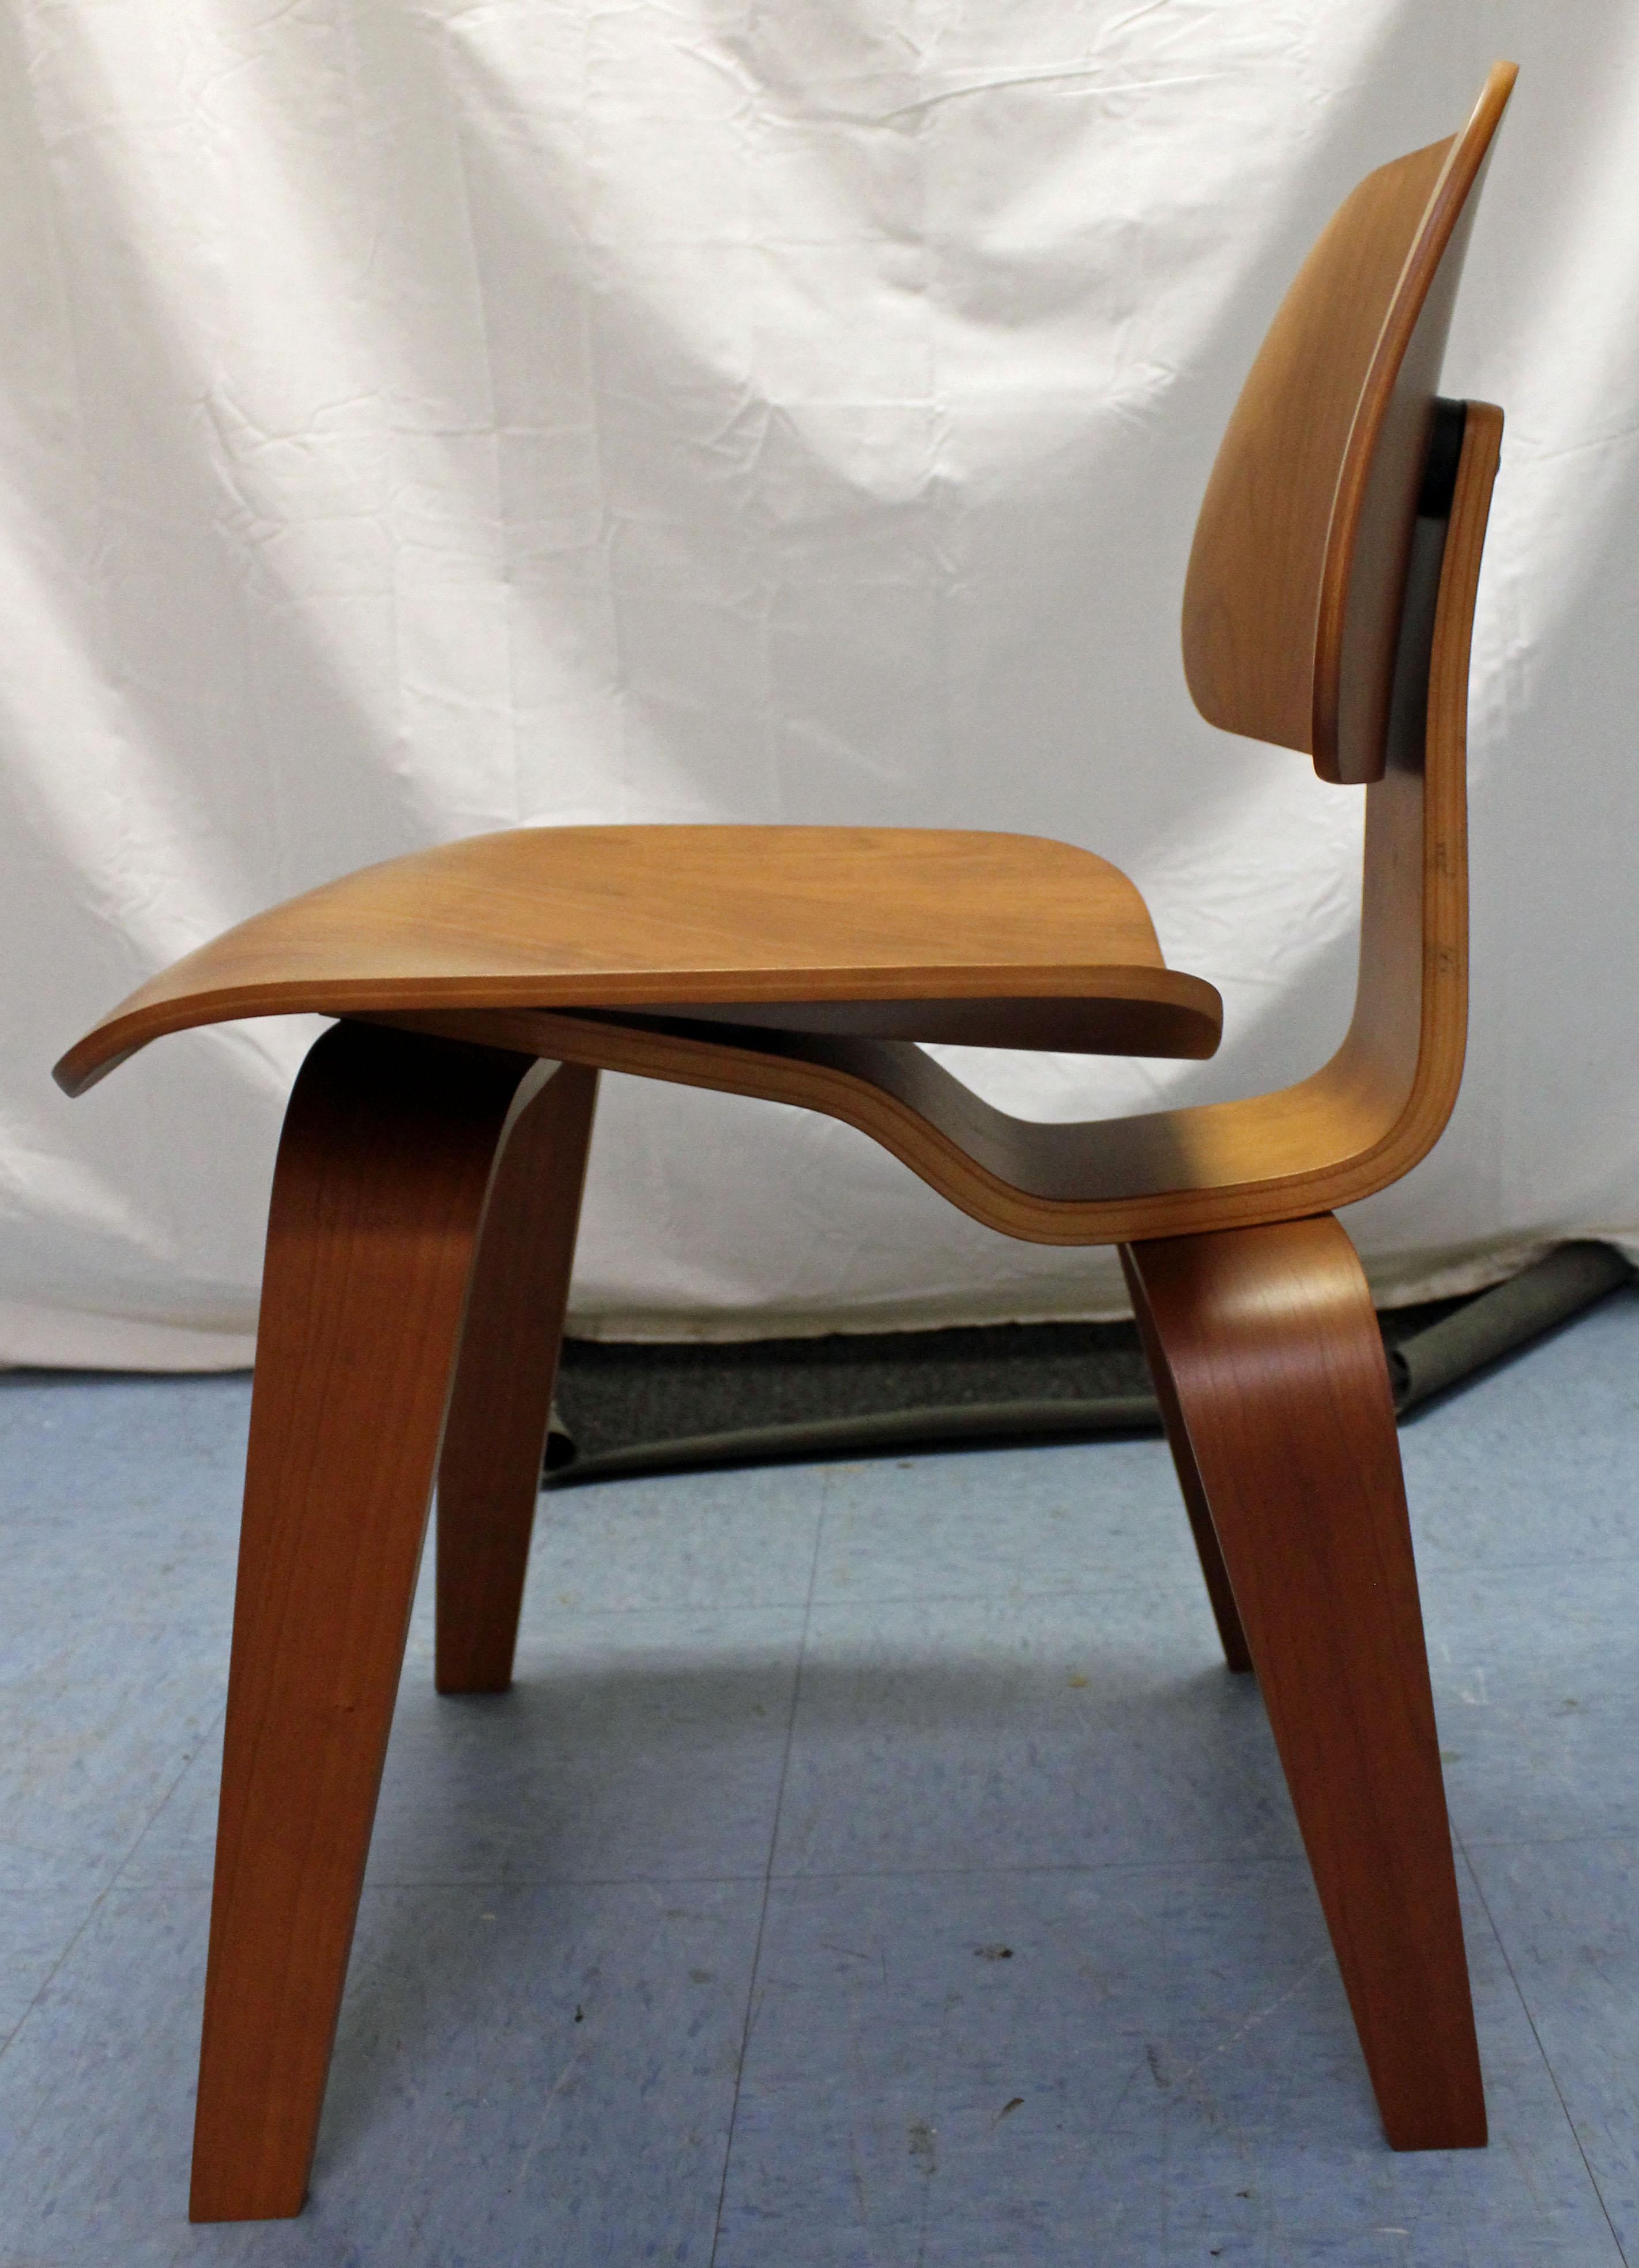 American Set of Six Mid-Century Modern Eames Herman Miller Molded Plywood Dining Chairs